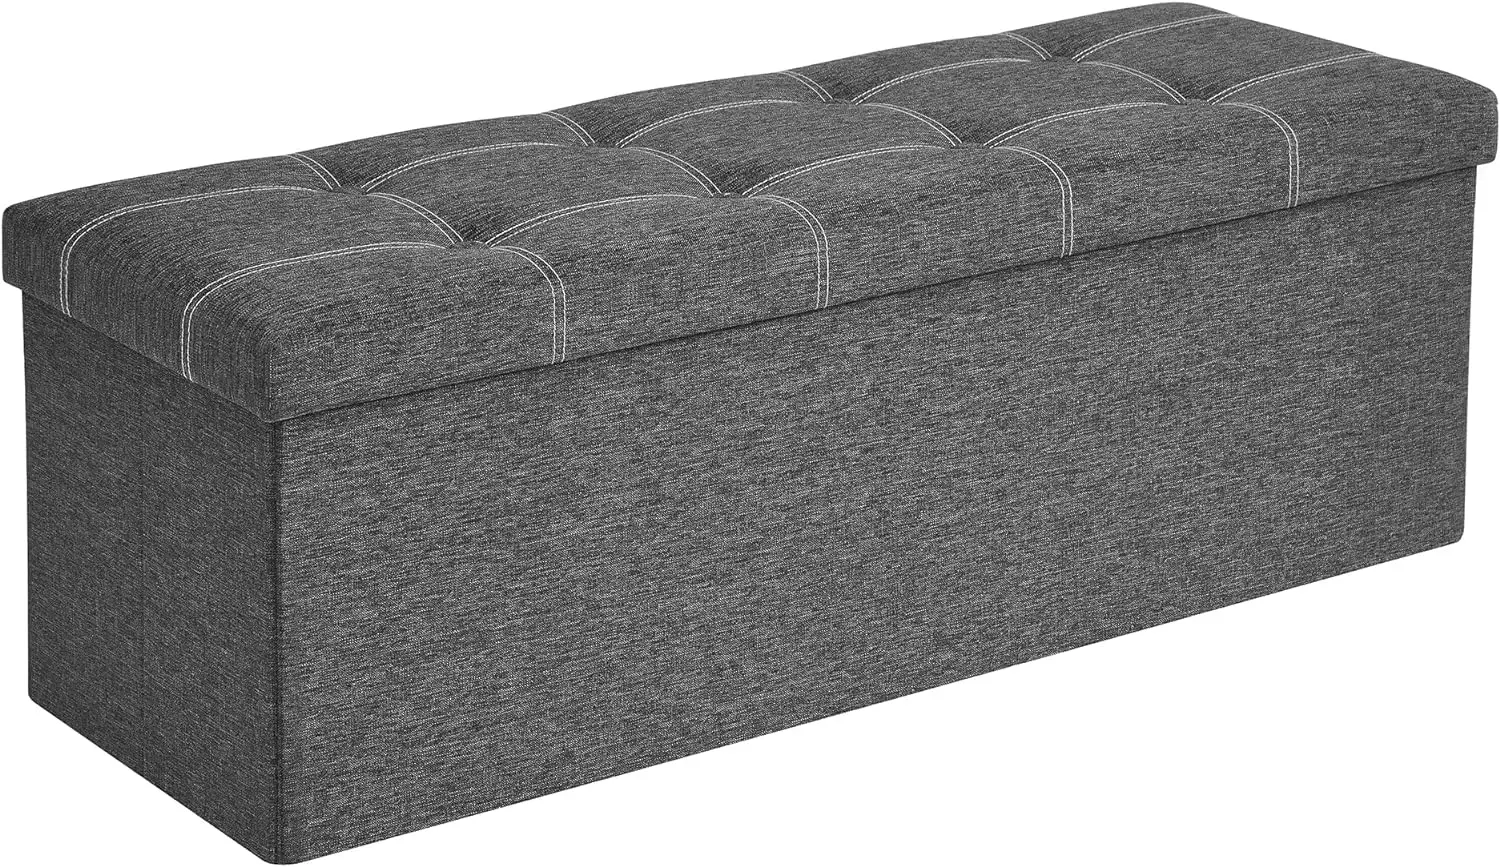 

Ottoman Storage Bench,35 Gal.Folding Chest with Breathable Linen-Look Fabric,Holds 660 lb,for Living Room, Bedroom,Dark Gray